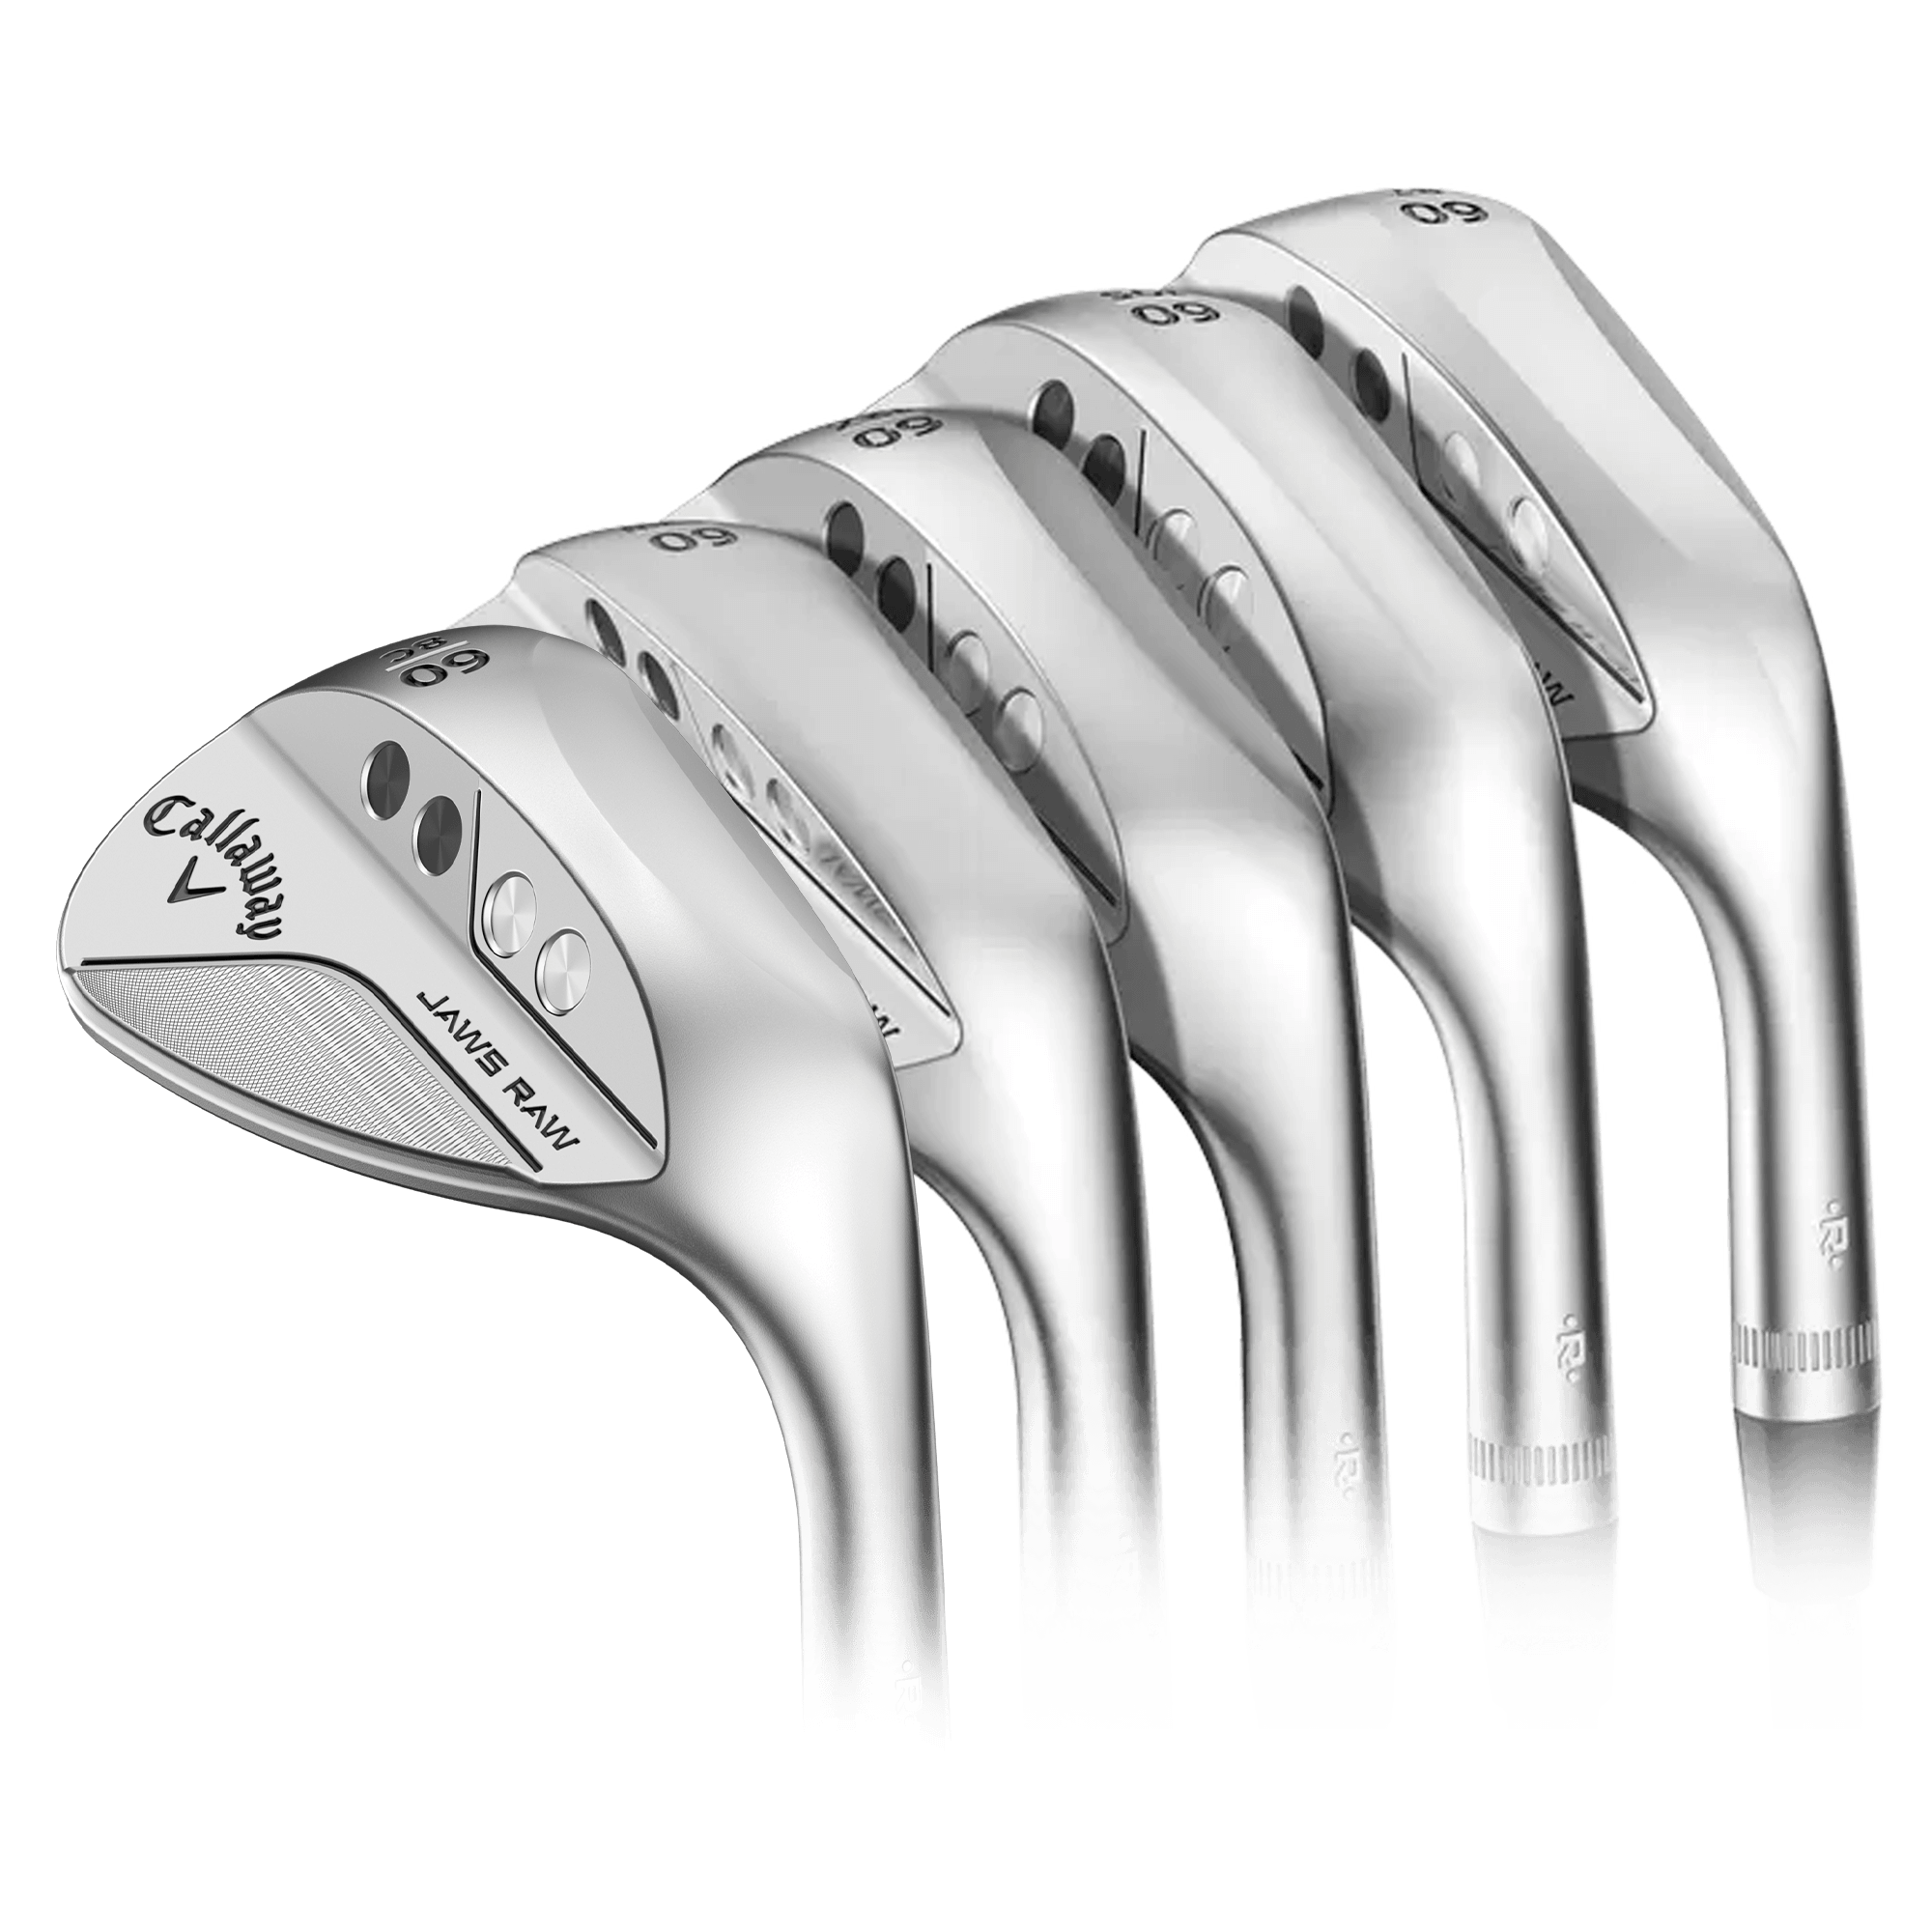 Women's Jaws Raw Face Chrome Wedges